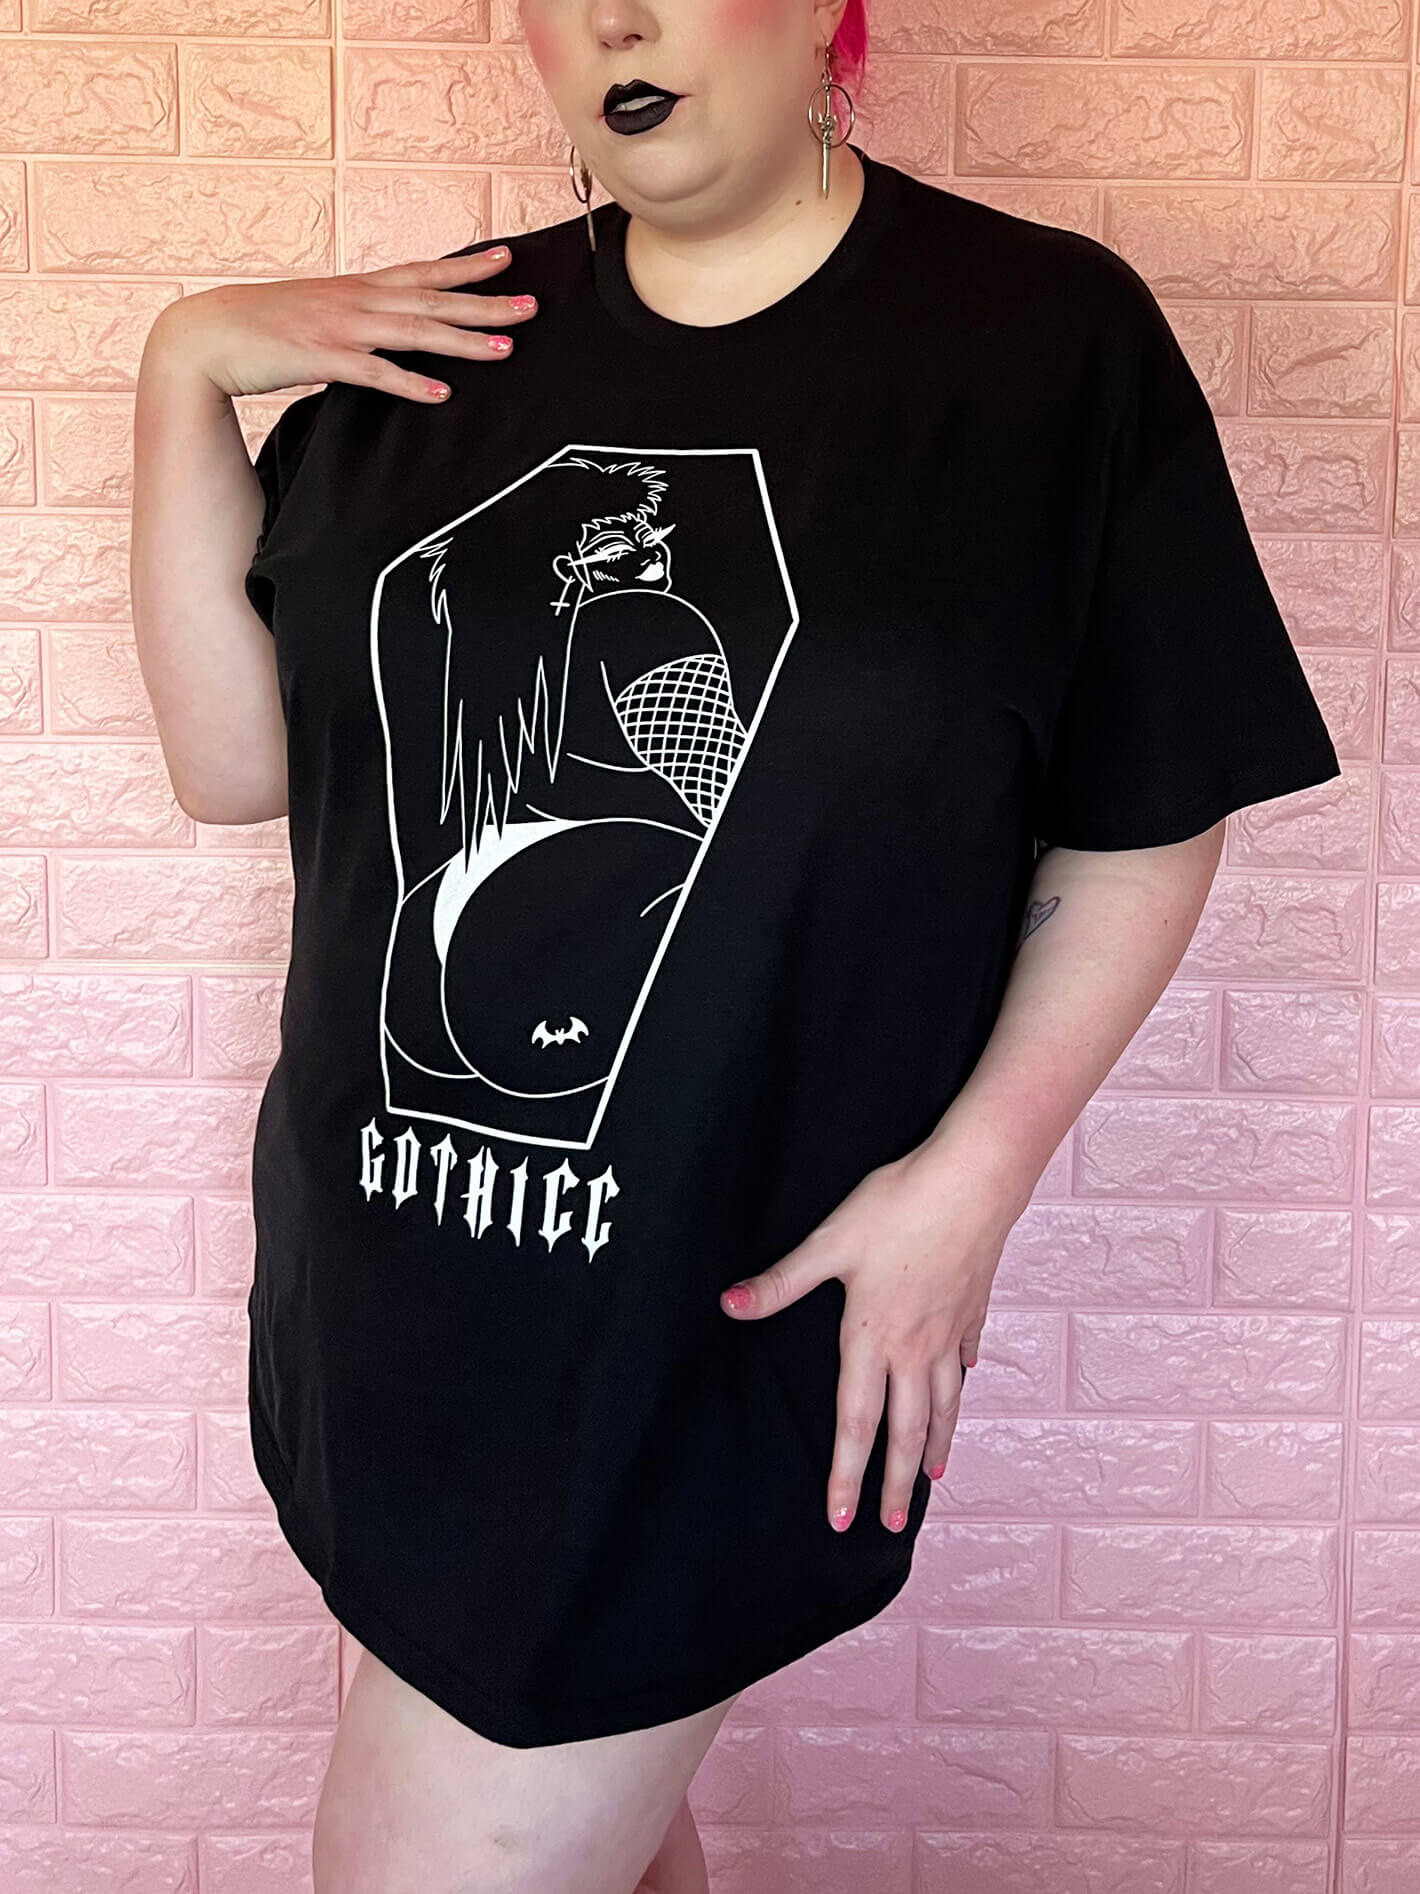 Plus size goth graphic tee.